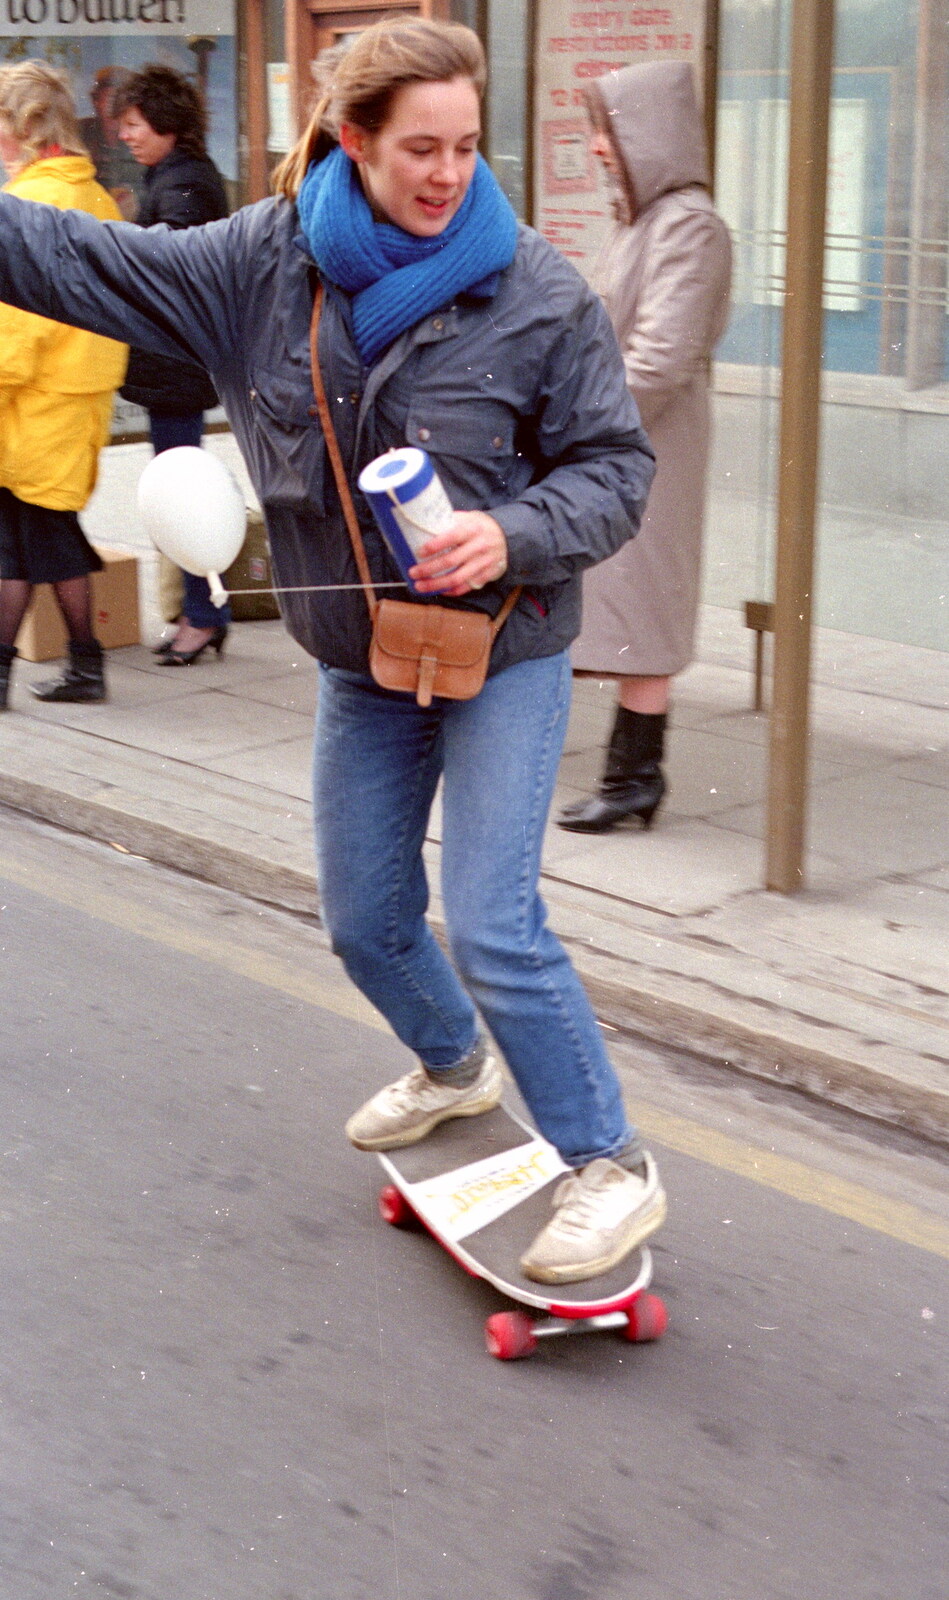 Skateboarding collection action from Uni: PPSU "Jazz" RAG Street Parade, Plymouth, Devon - 17th February 1986